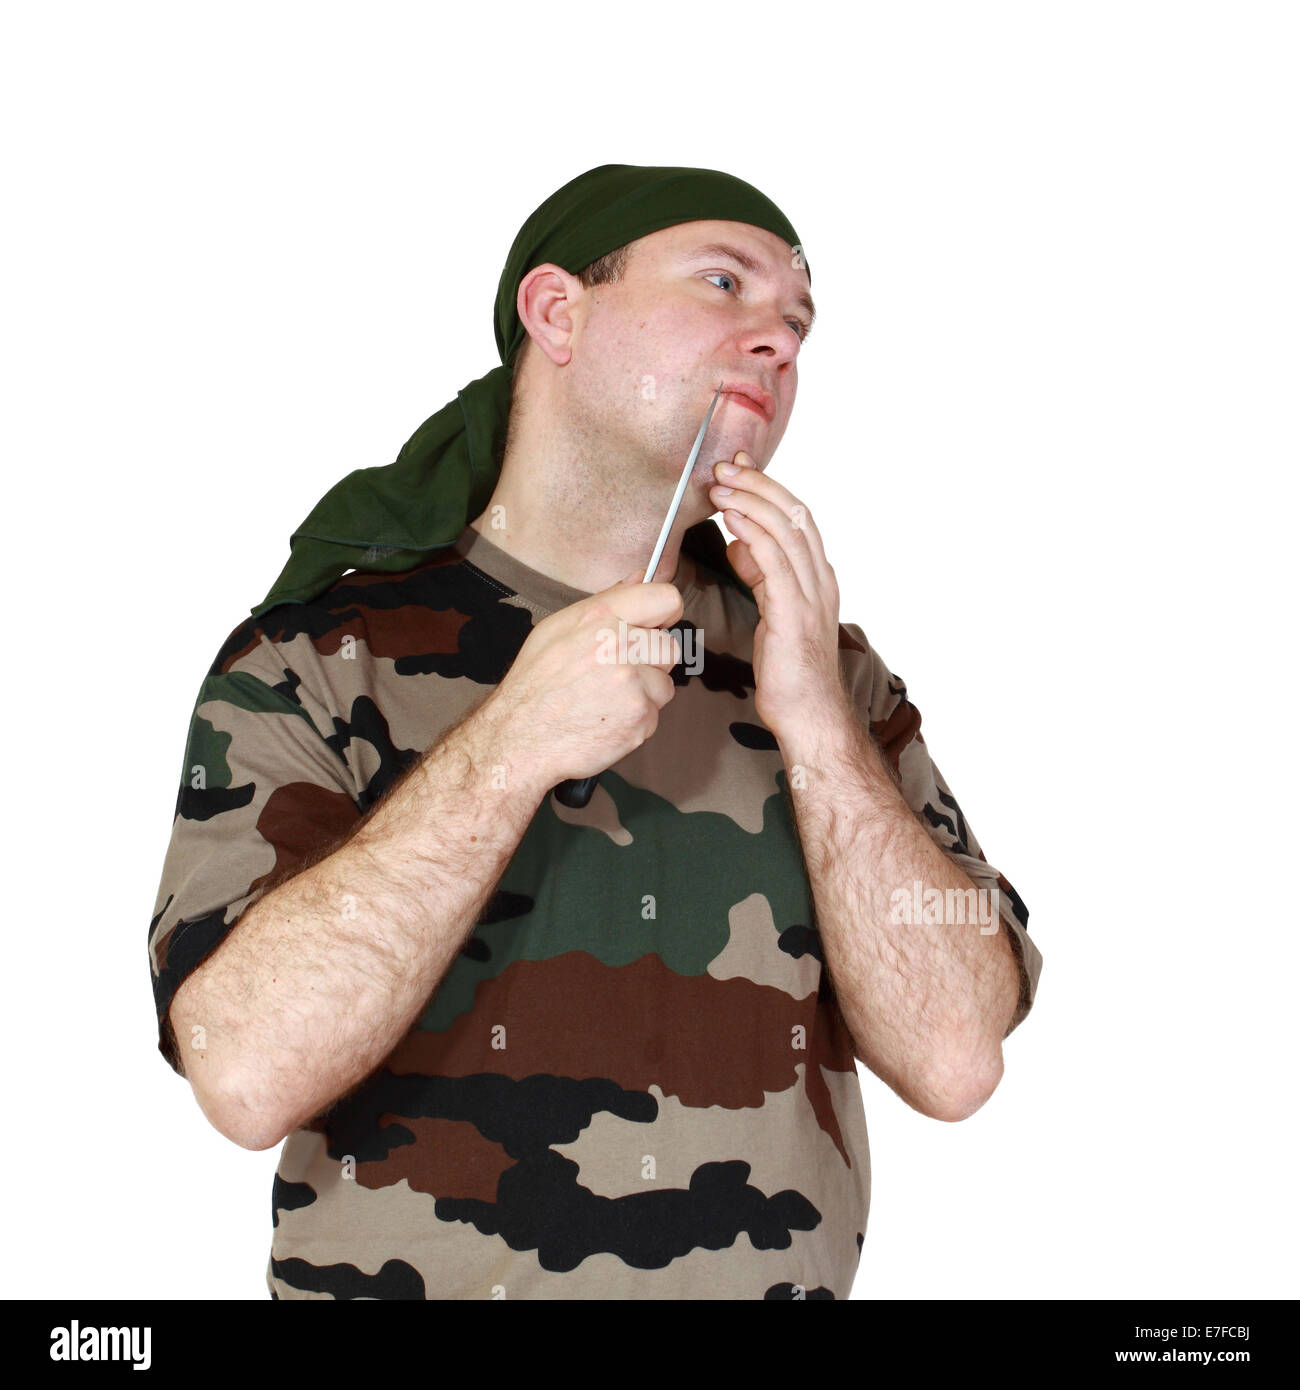 Man in camouflage shaves his face using a battle knife. Isolated on white background Stock Photo